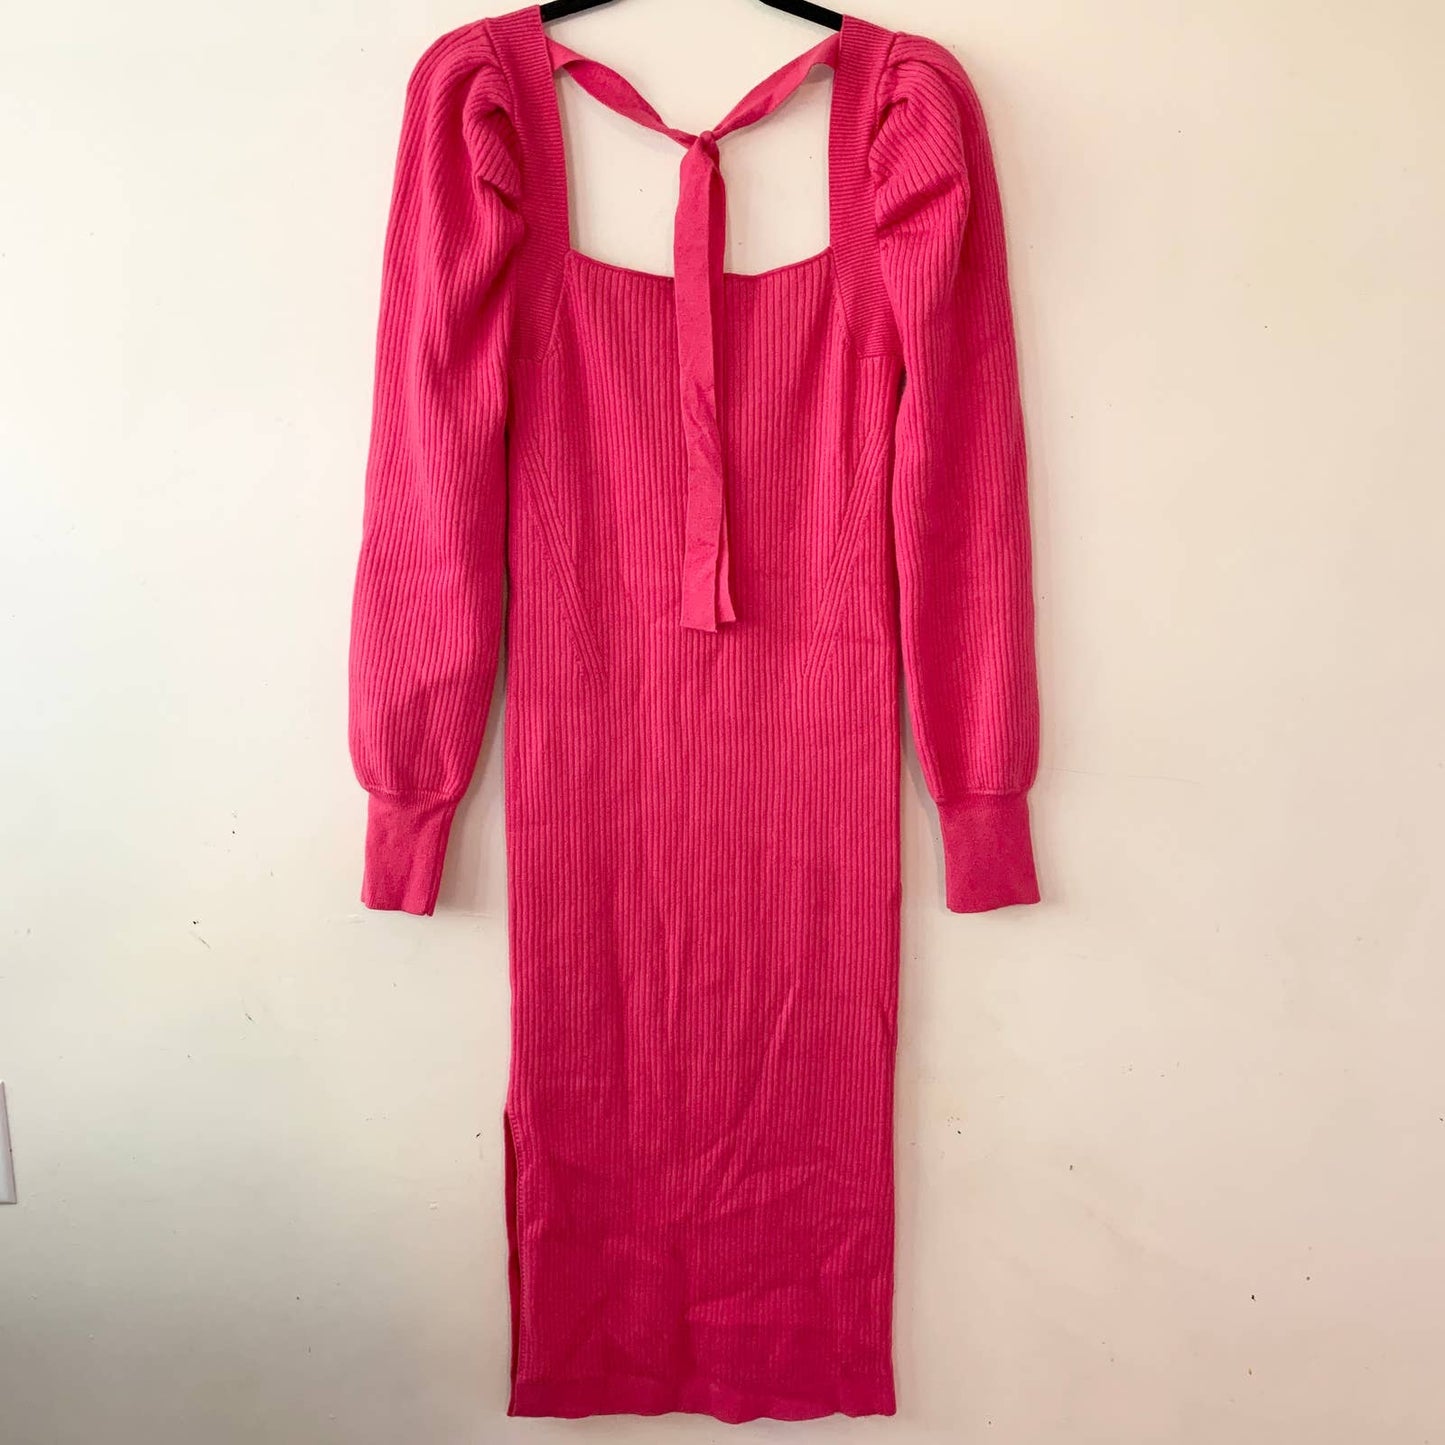 House of Harlow 1960 Hot Pink Ribbed Knit Sweater Dress